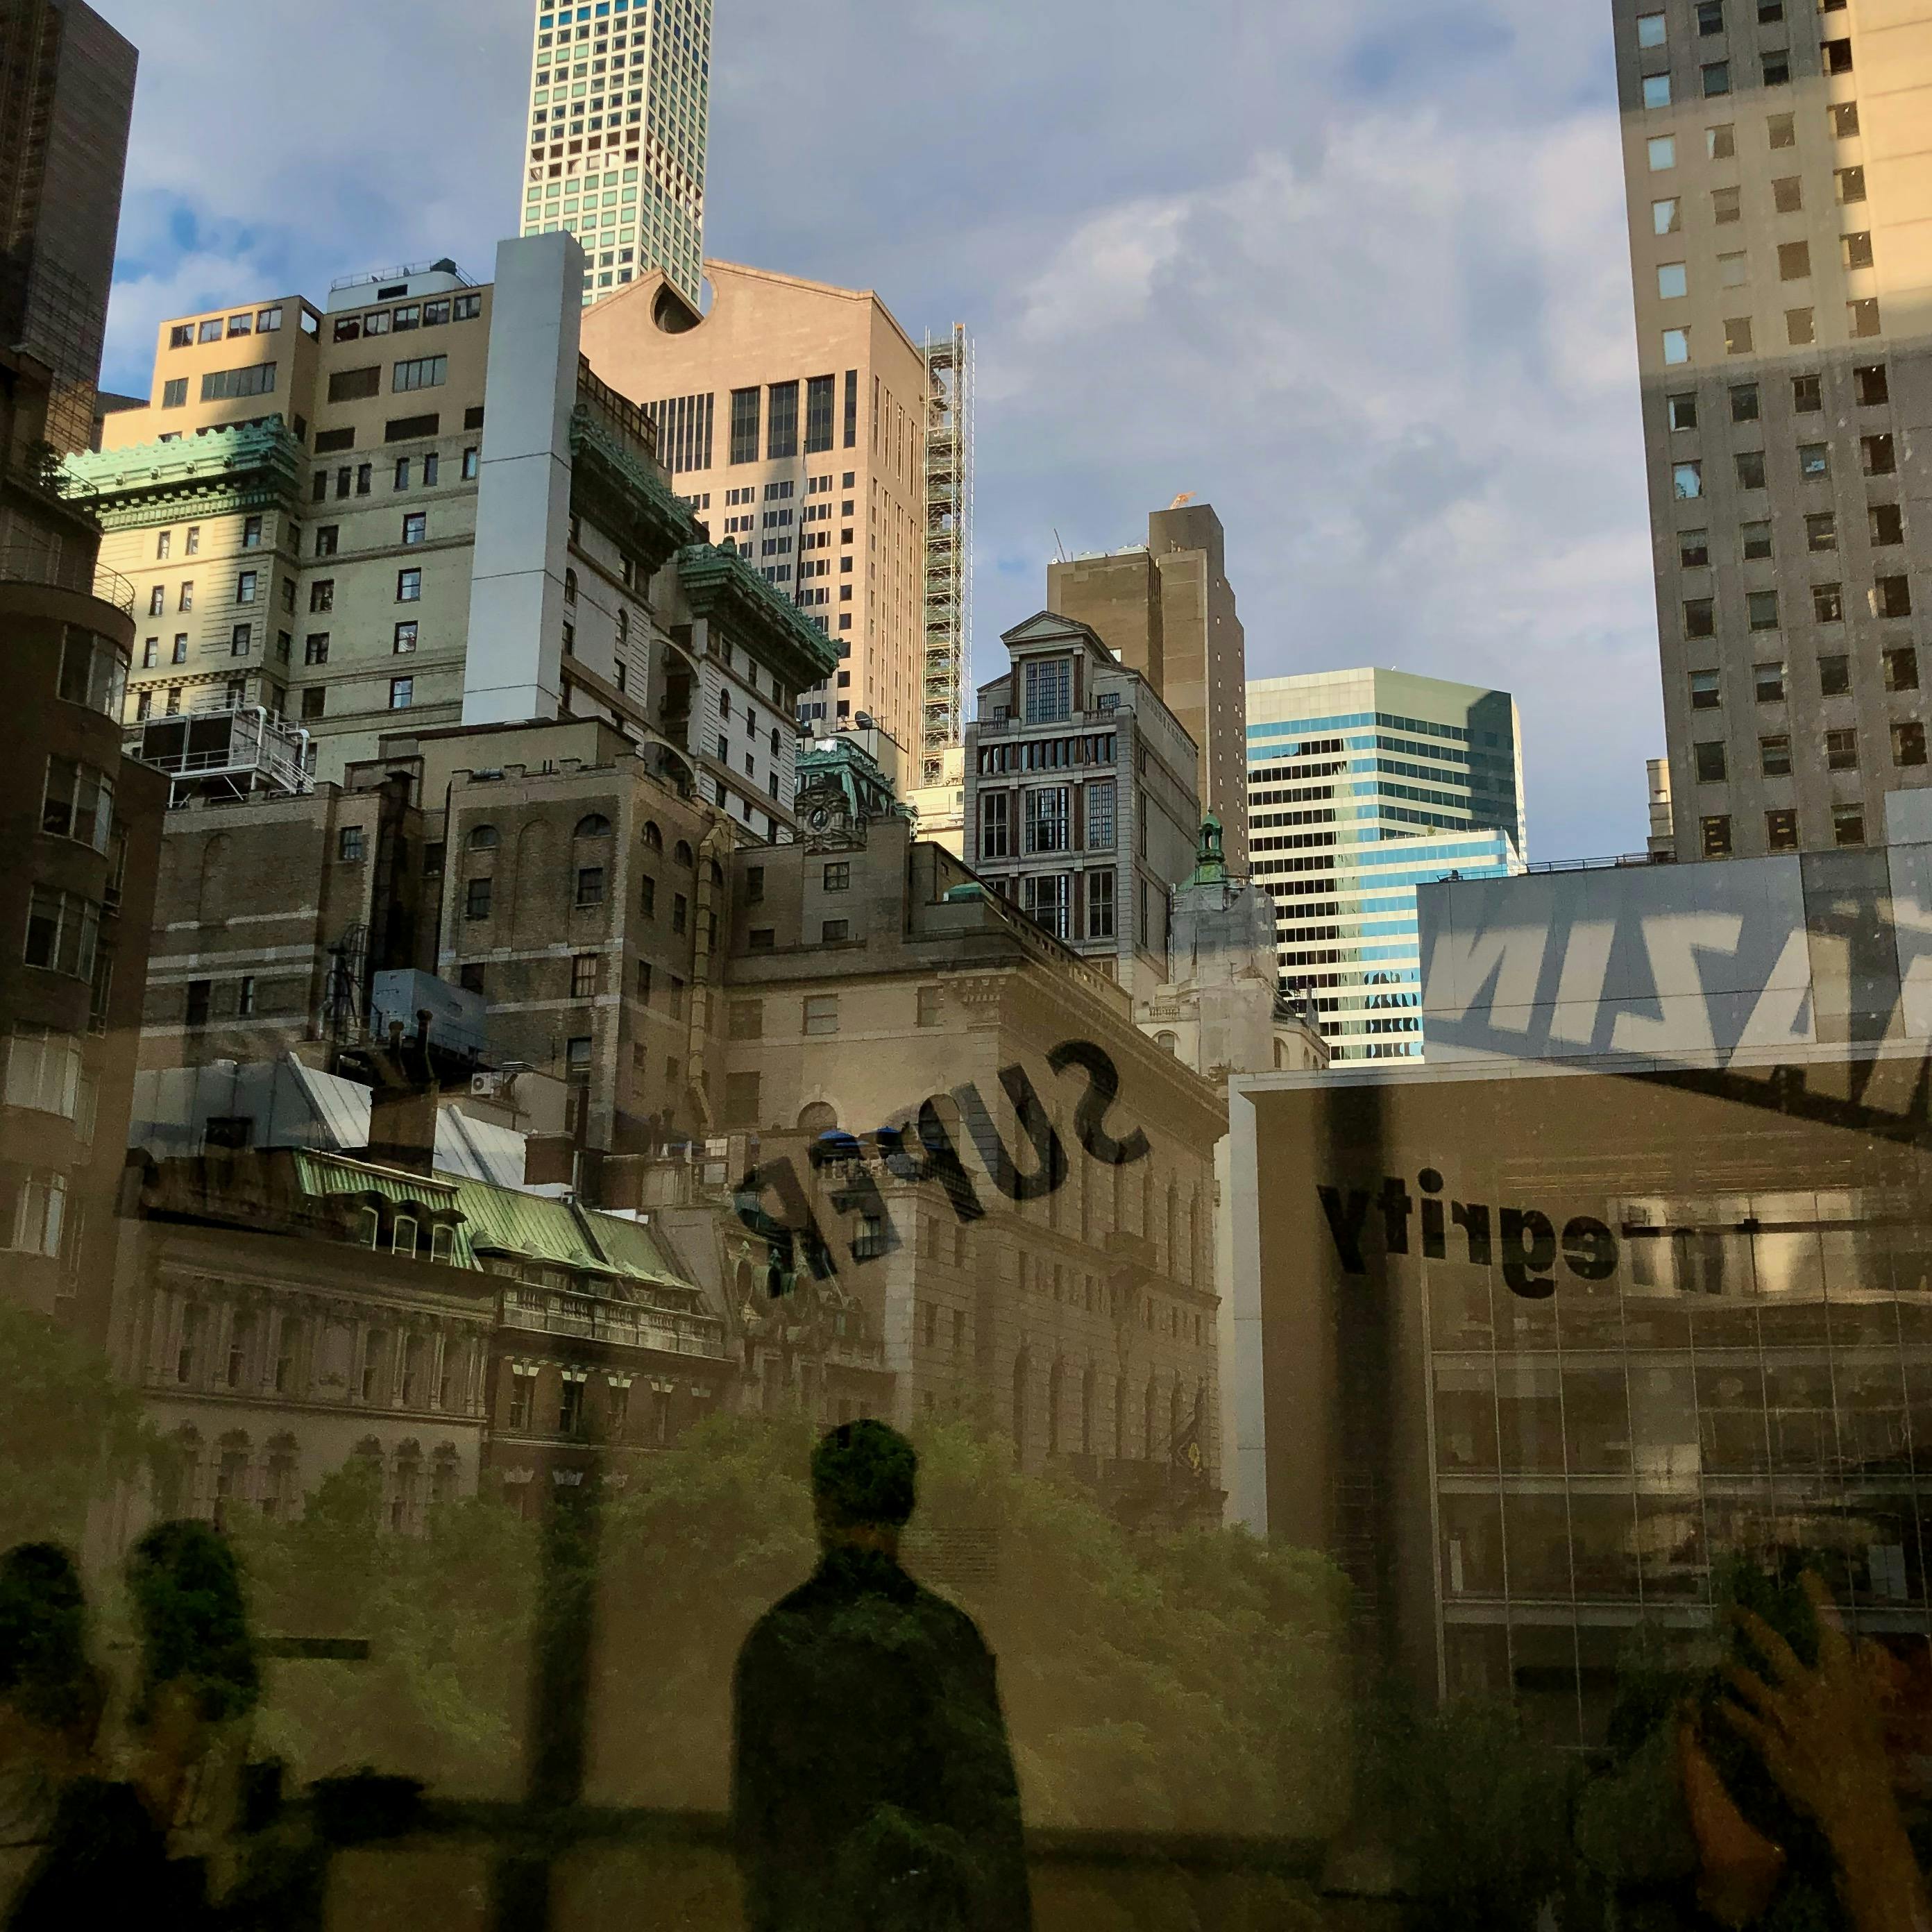 A dozen New York City skyscrapers viewed through a window at the MOMA featuring the shadowy reflections of three strangers